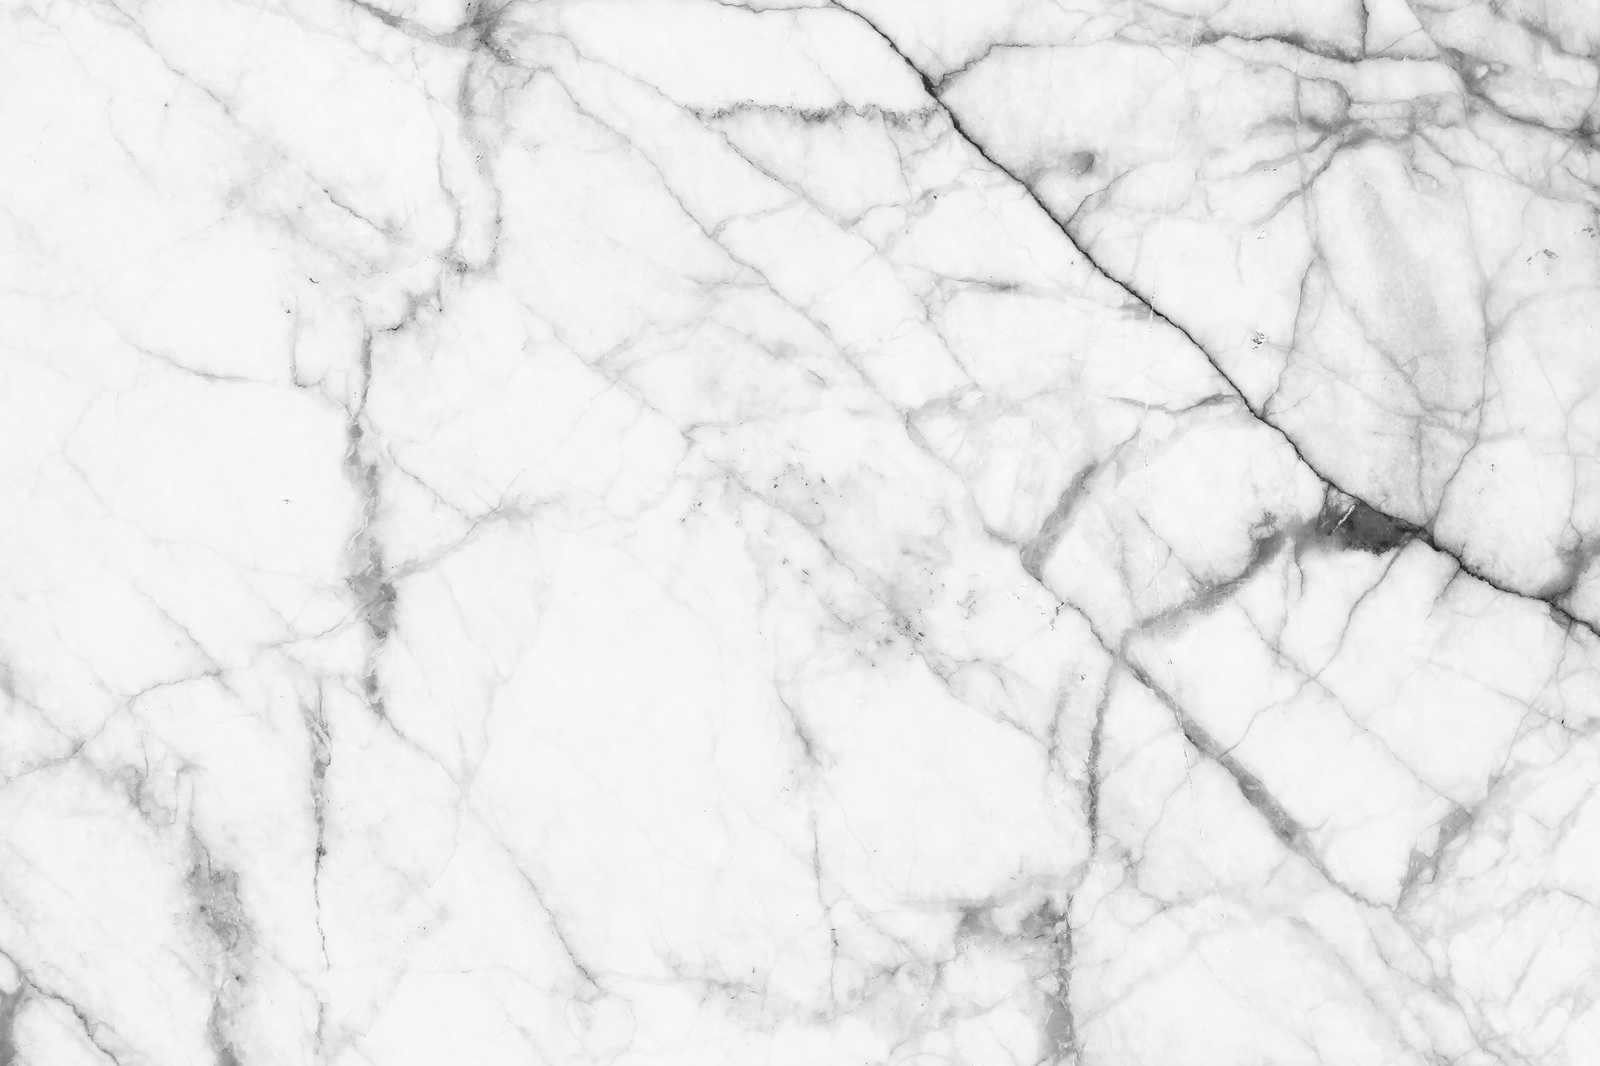             Black and White Canvas Painting Marble with Nature Details - 0.90 m x 0.60 m
        